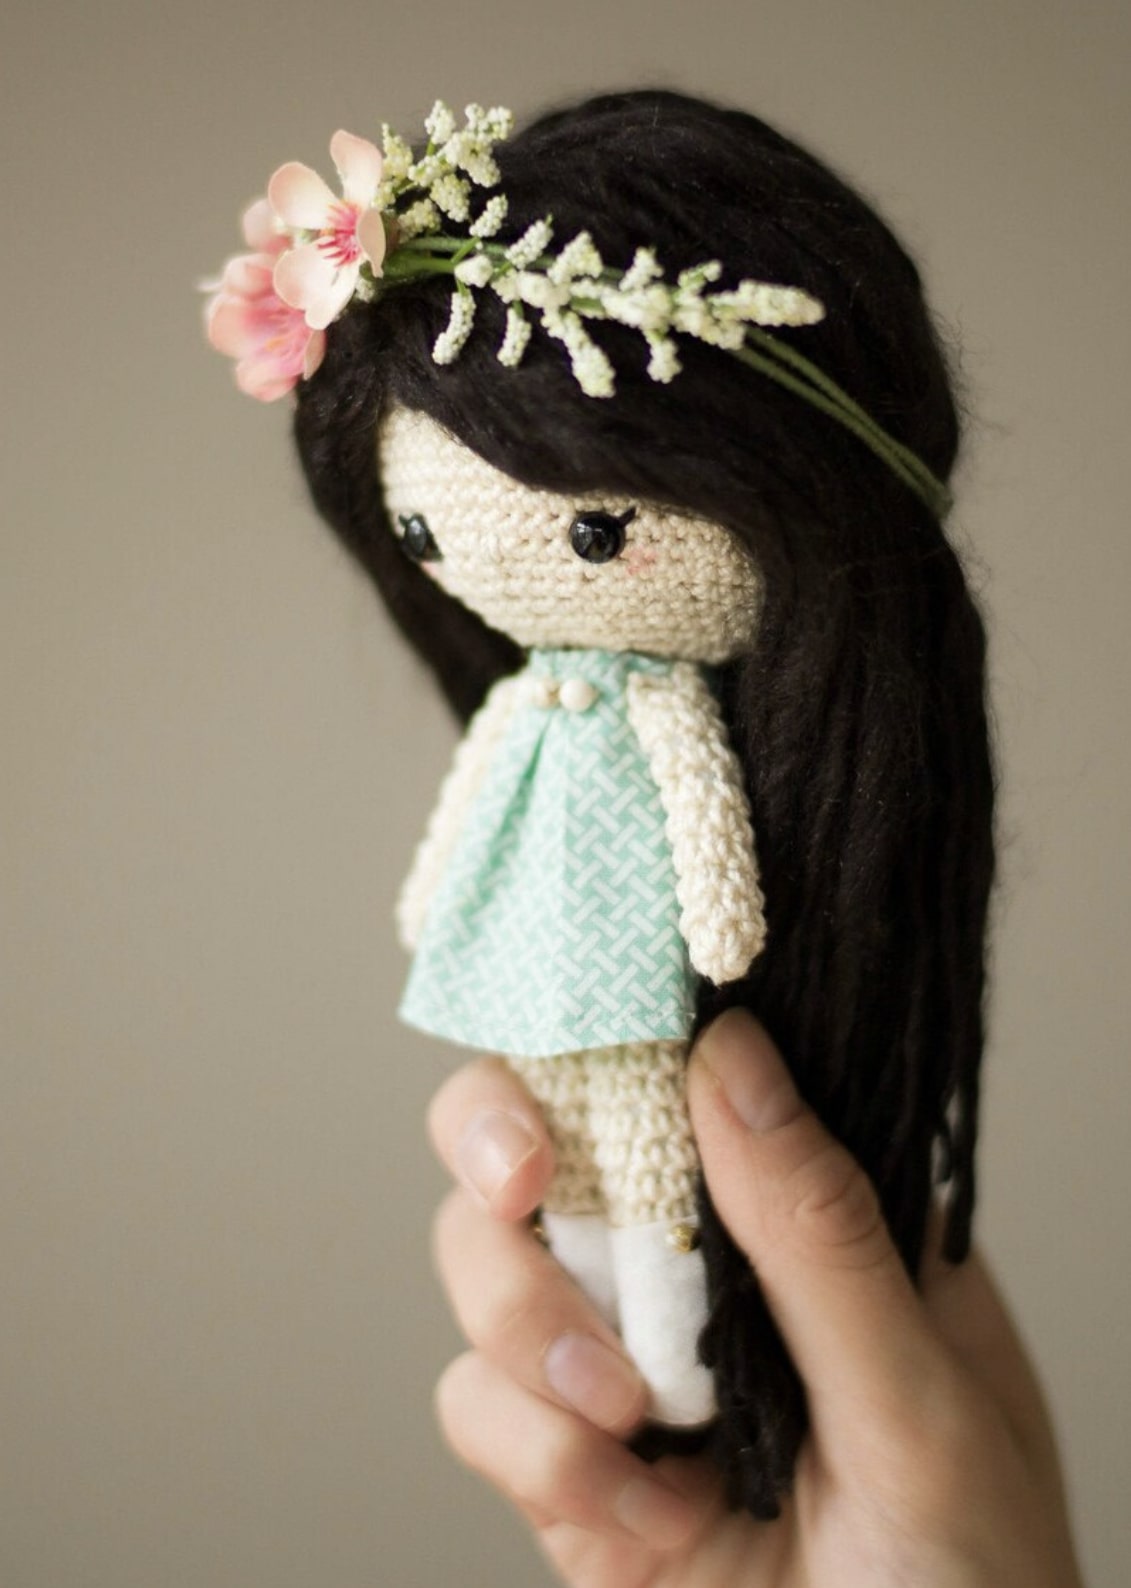 free amigurumi crochet patterns dolls by stephanie lau of allaboutami - my blog post has all the info you need to read this pattern for free online on Stephanie's own website or to buy the printable PDF download pattern without the ads from Etsy. Either way it's one of the cutest patterns EVER! hope you enjoy x